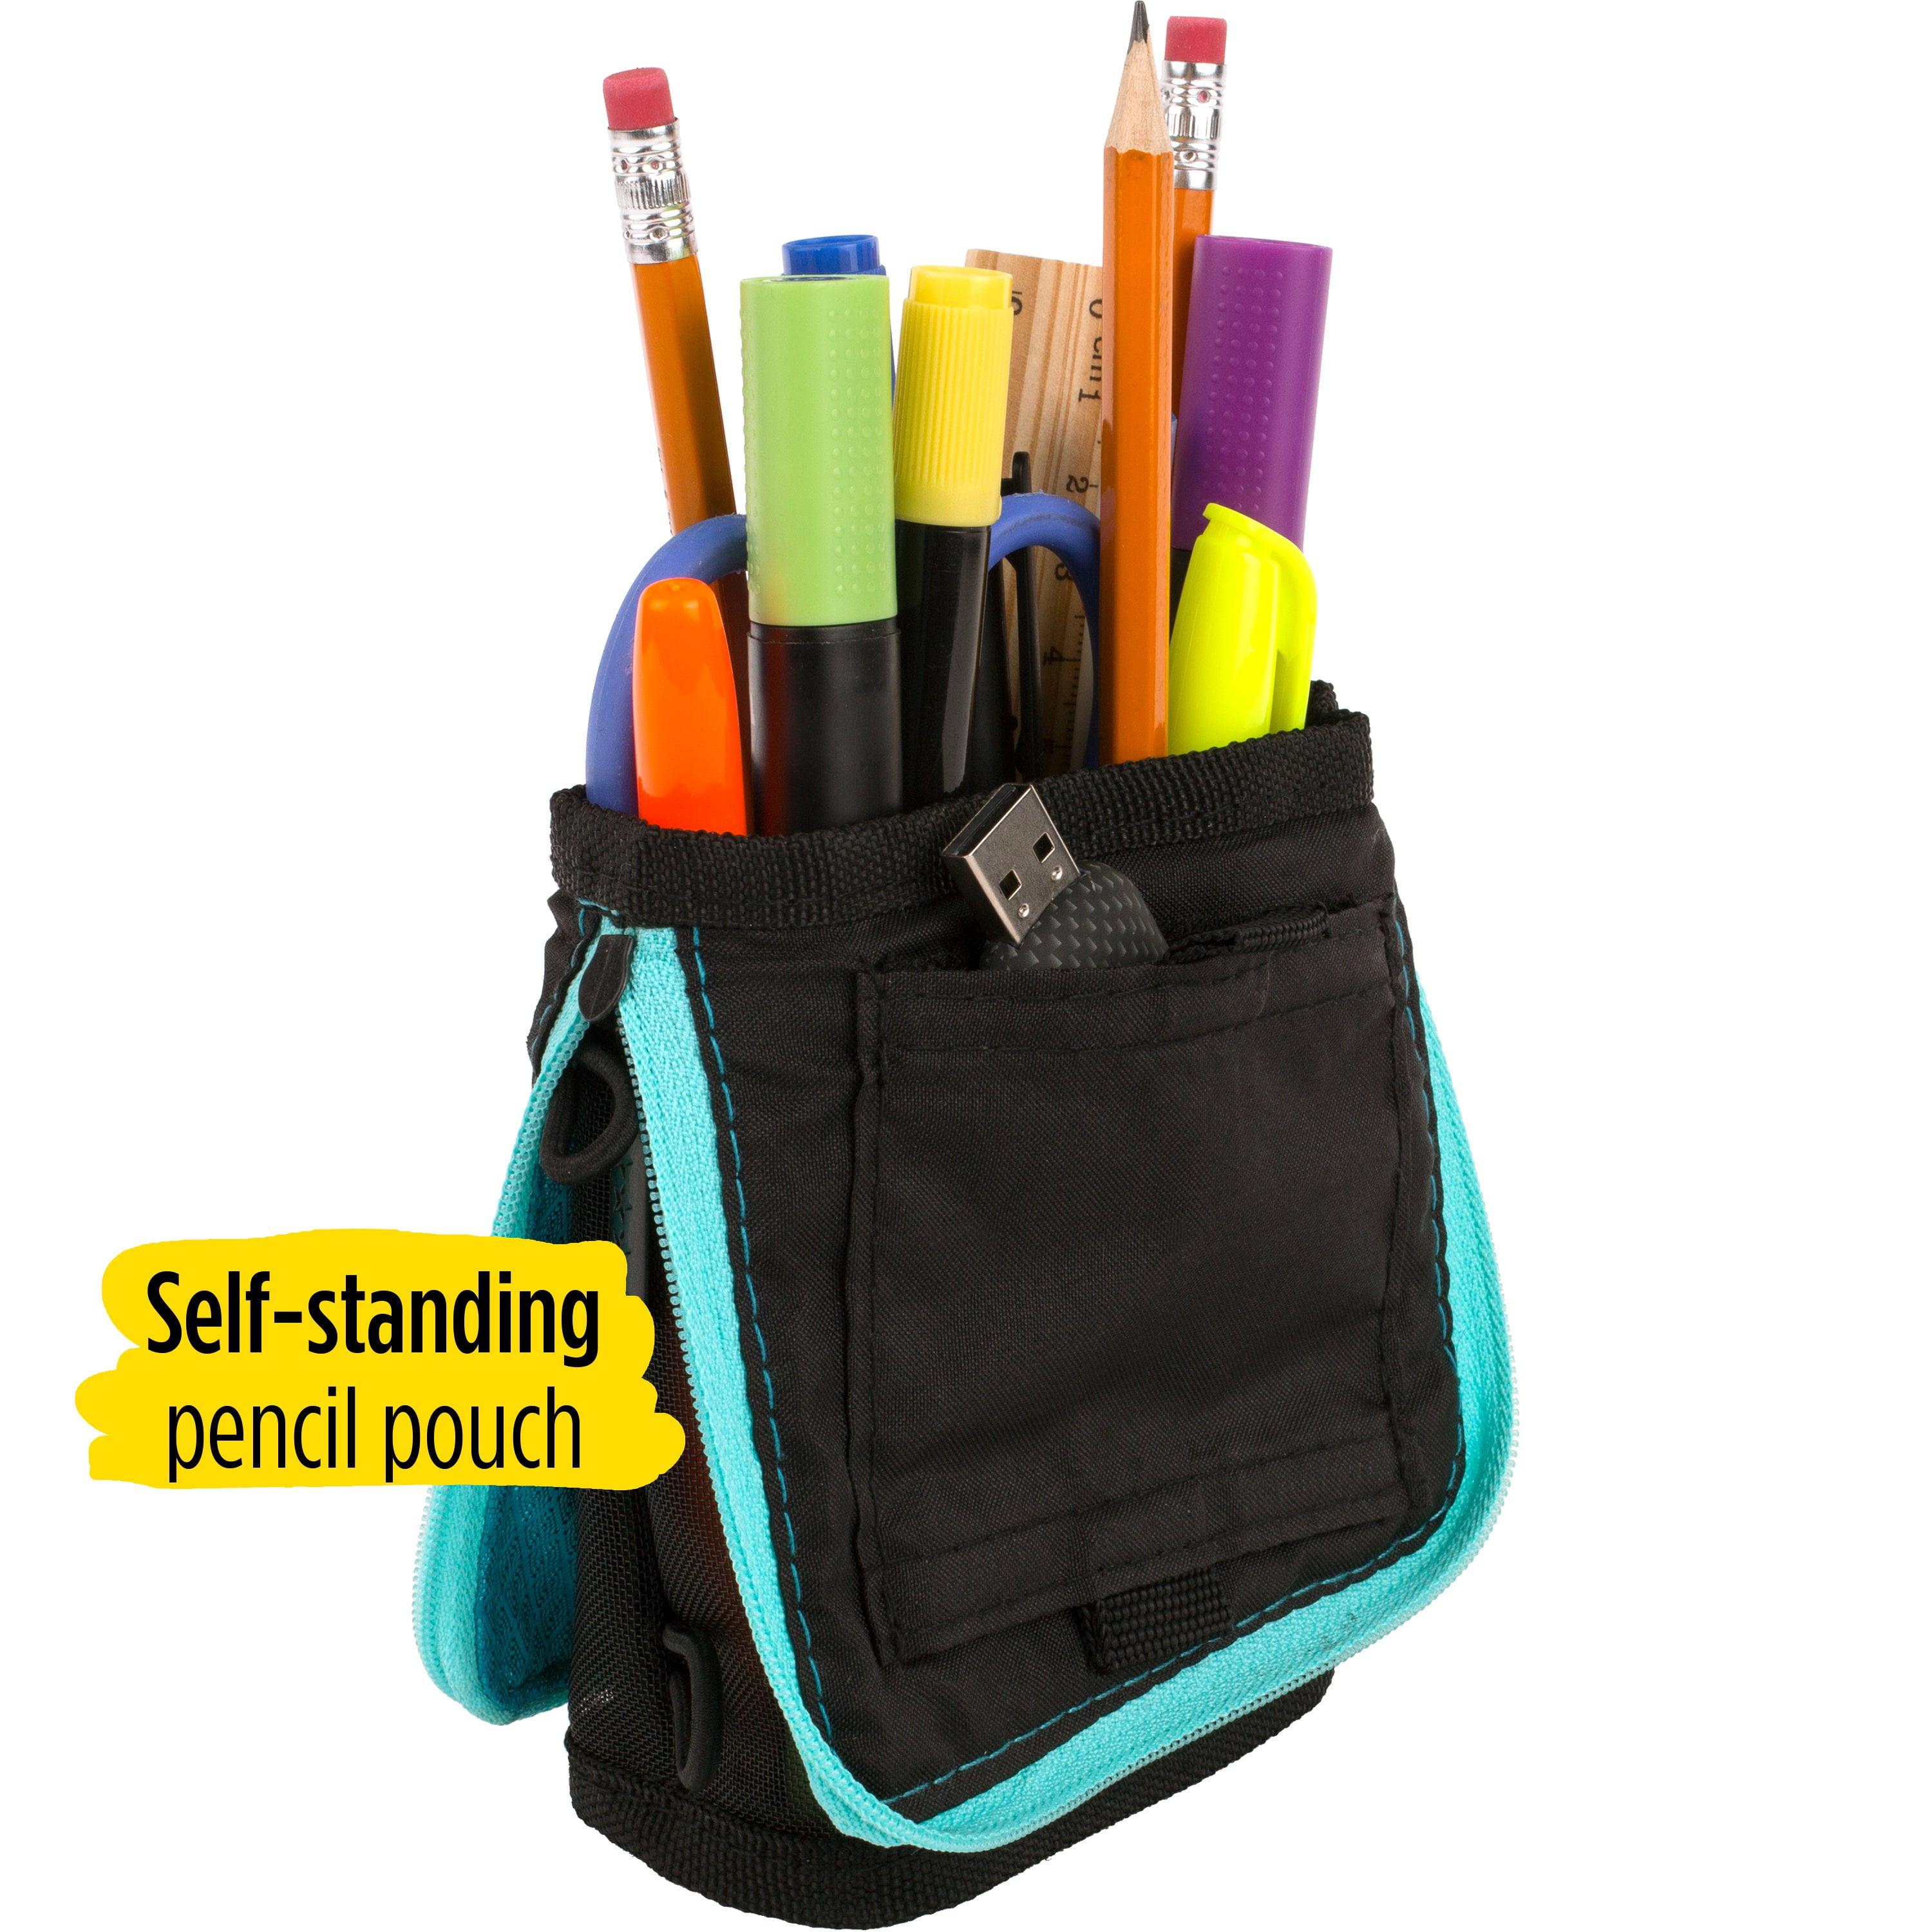 Five Star Pencil Pouch, Pen Case, Fits 3 Ring Binder, Stand 'N Store,  Black/Red (50516CE8)